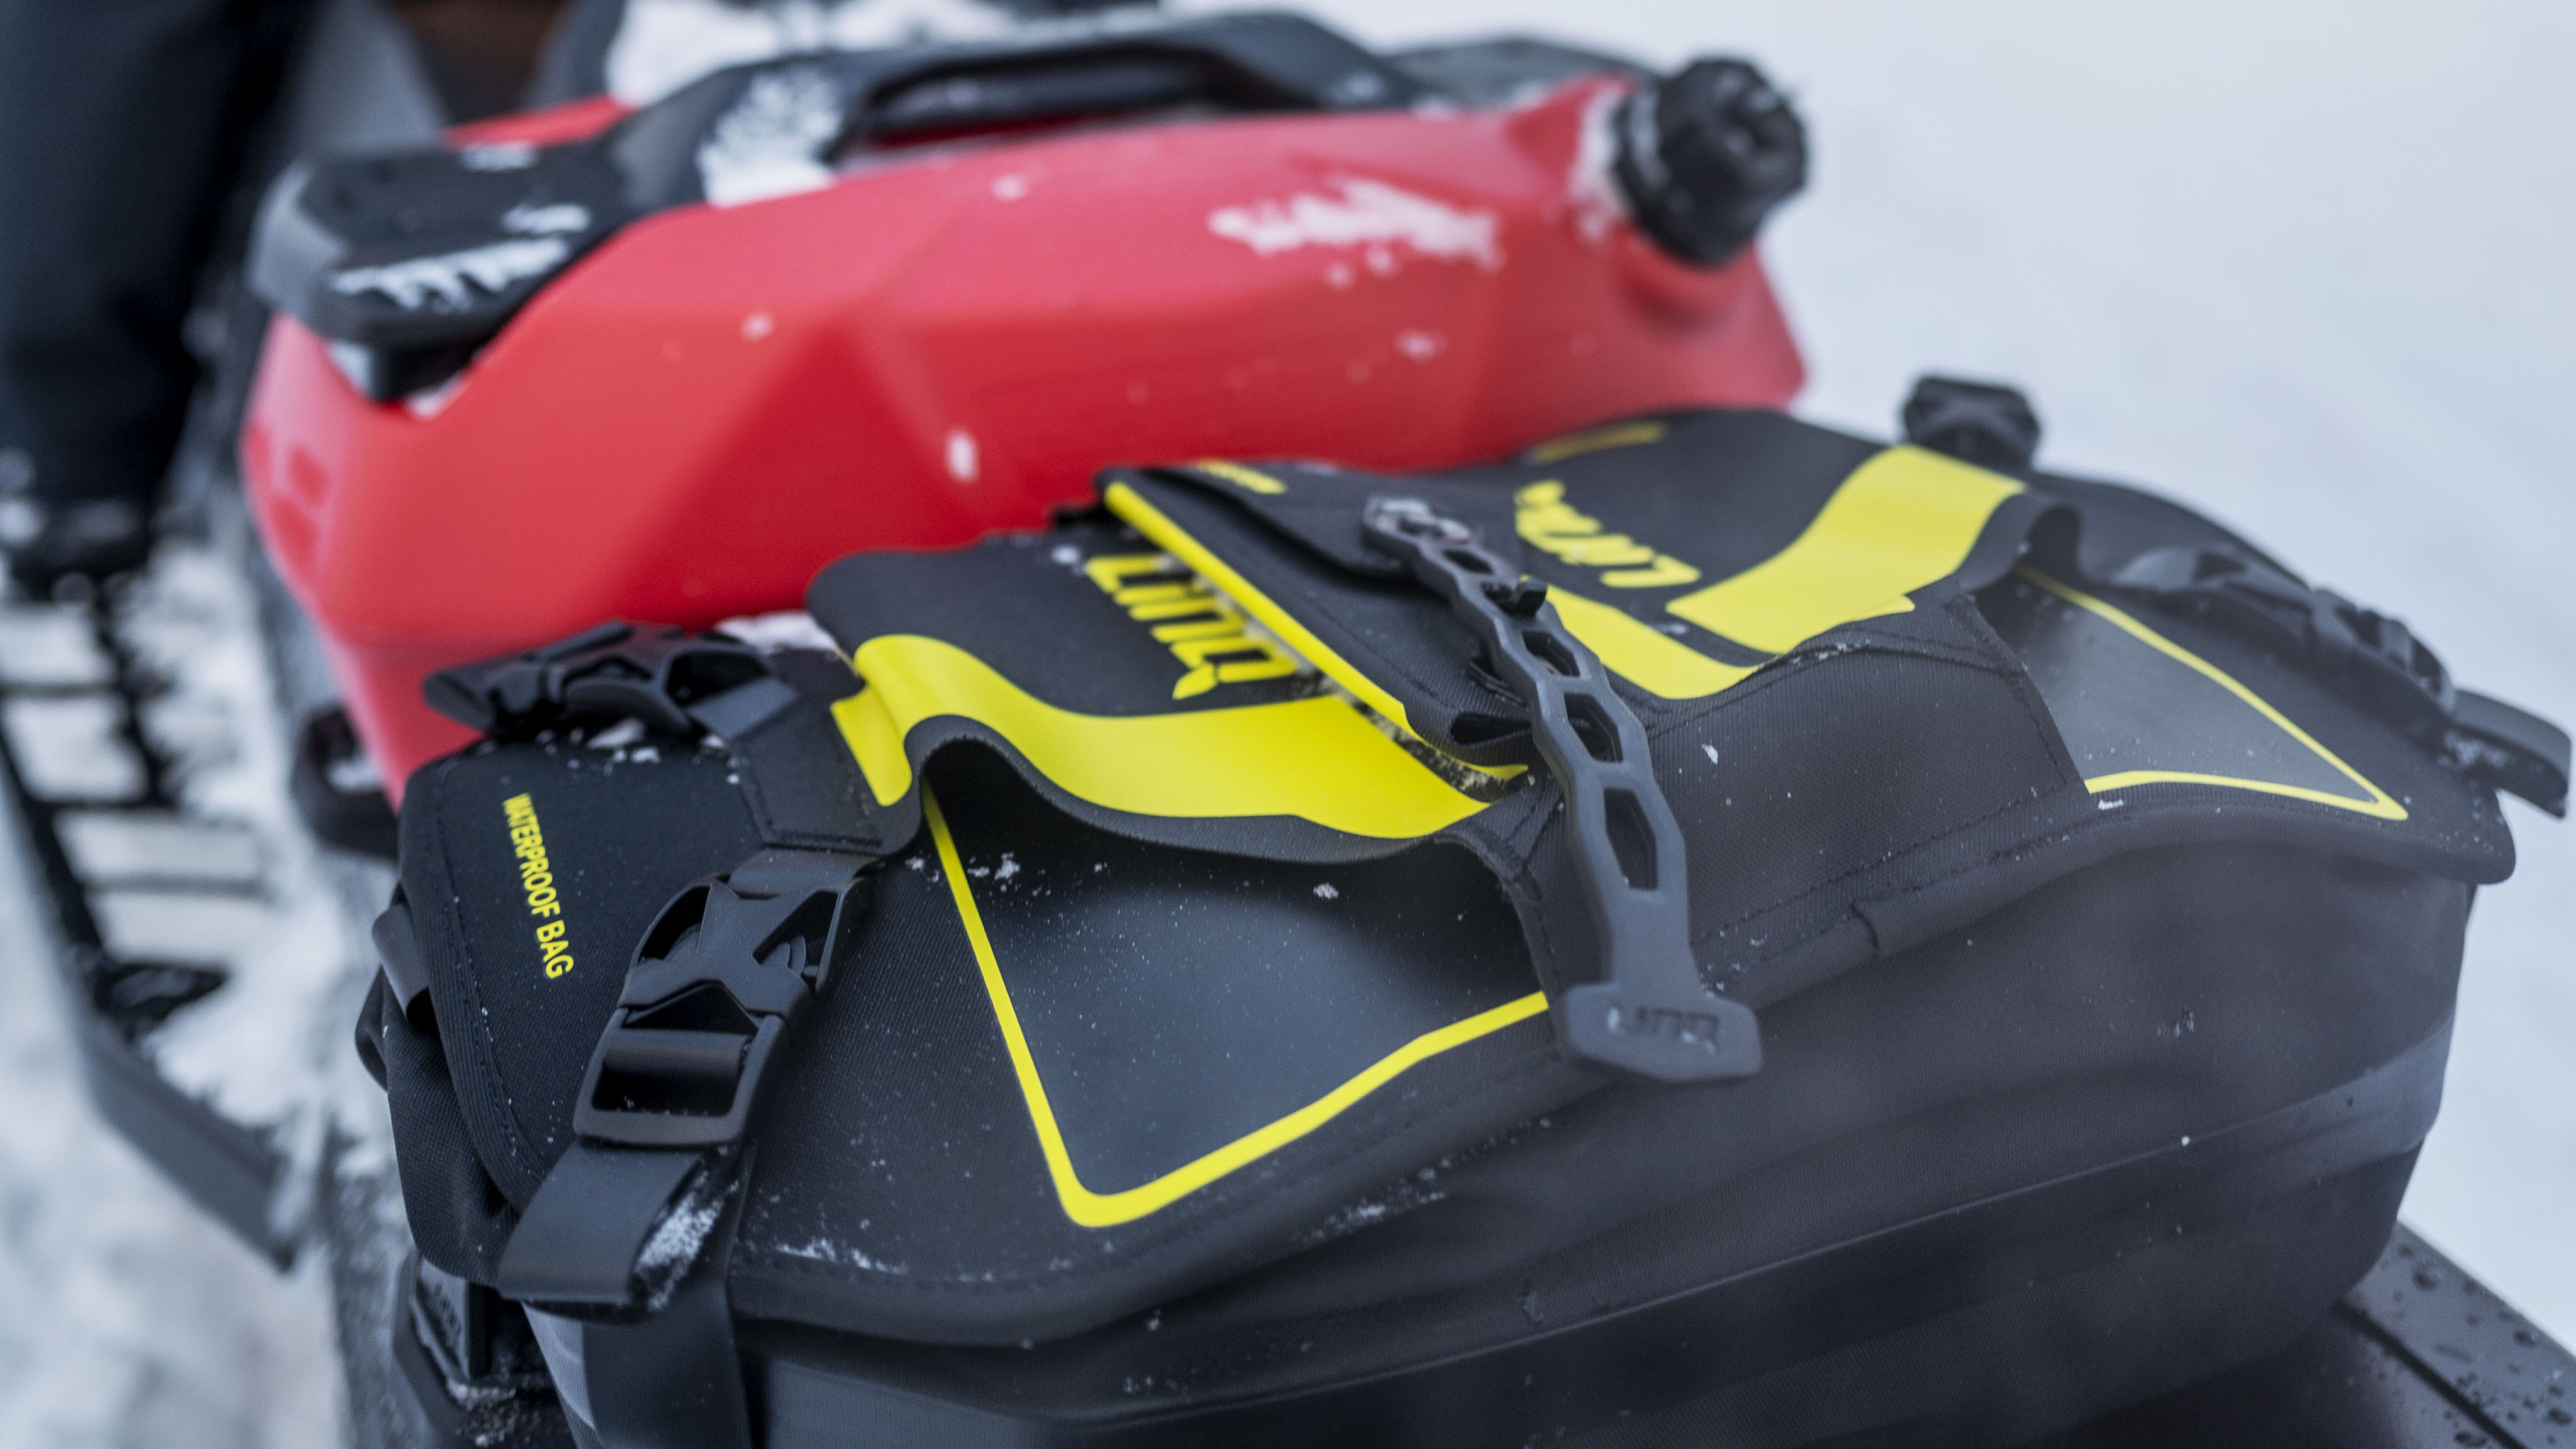 A LinQ bag and fuel caddy on a Ski-Doo tunnel